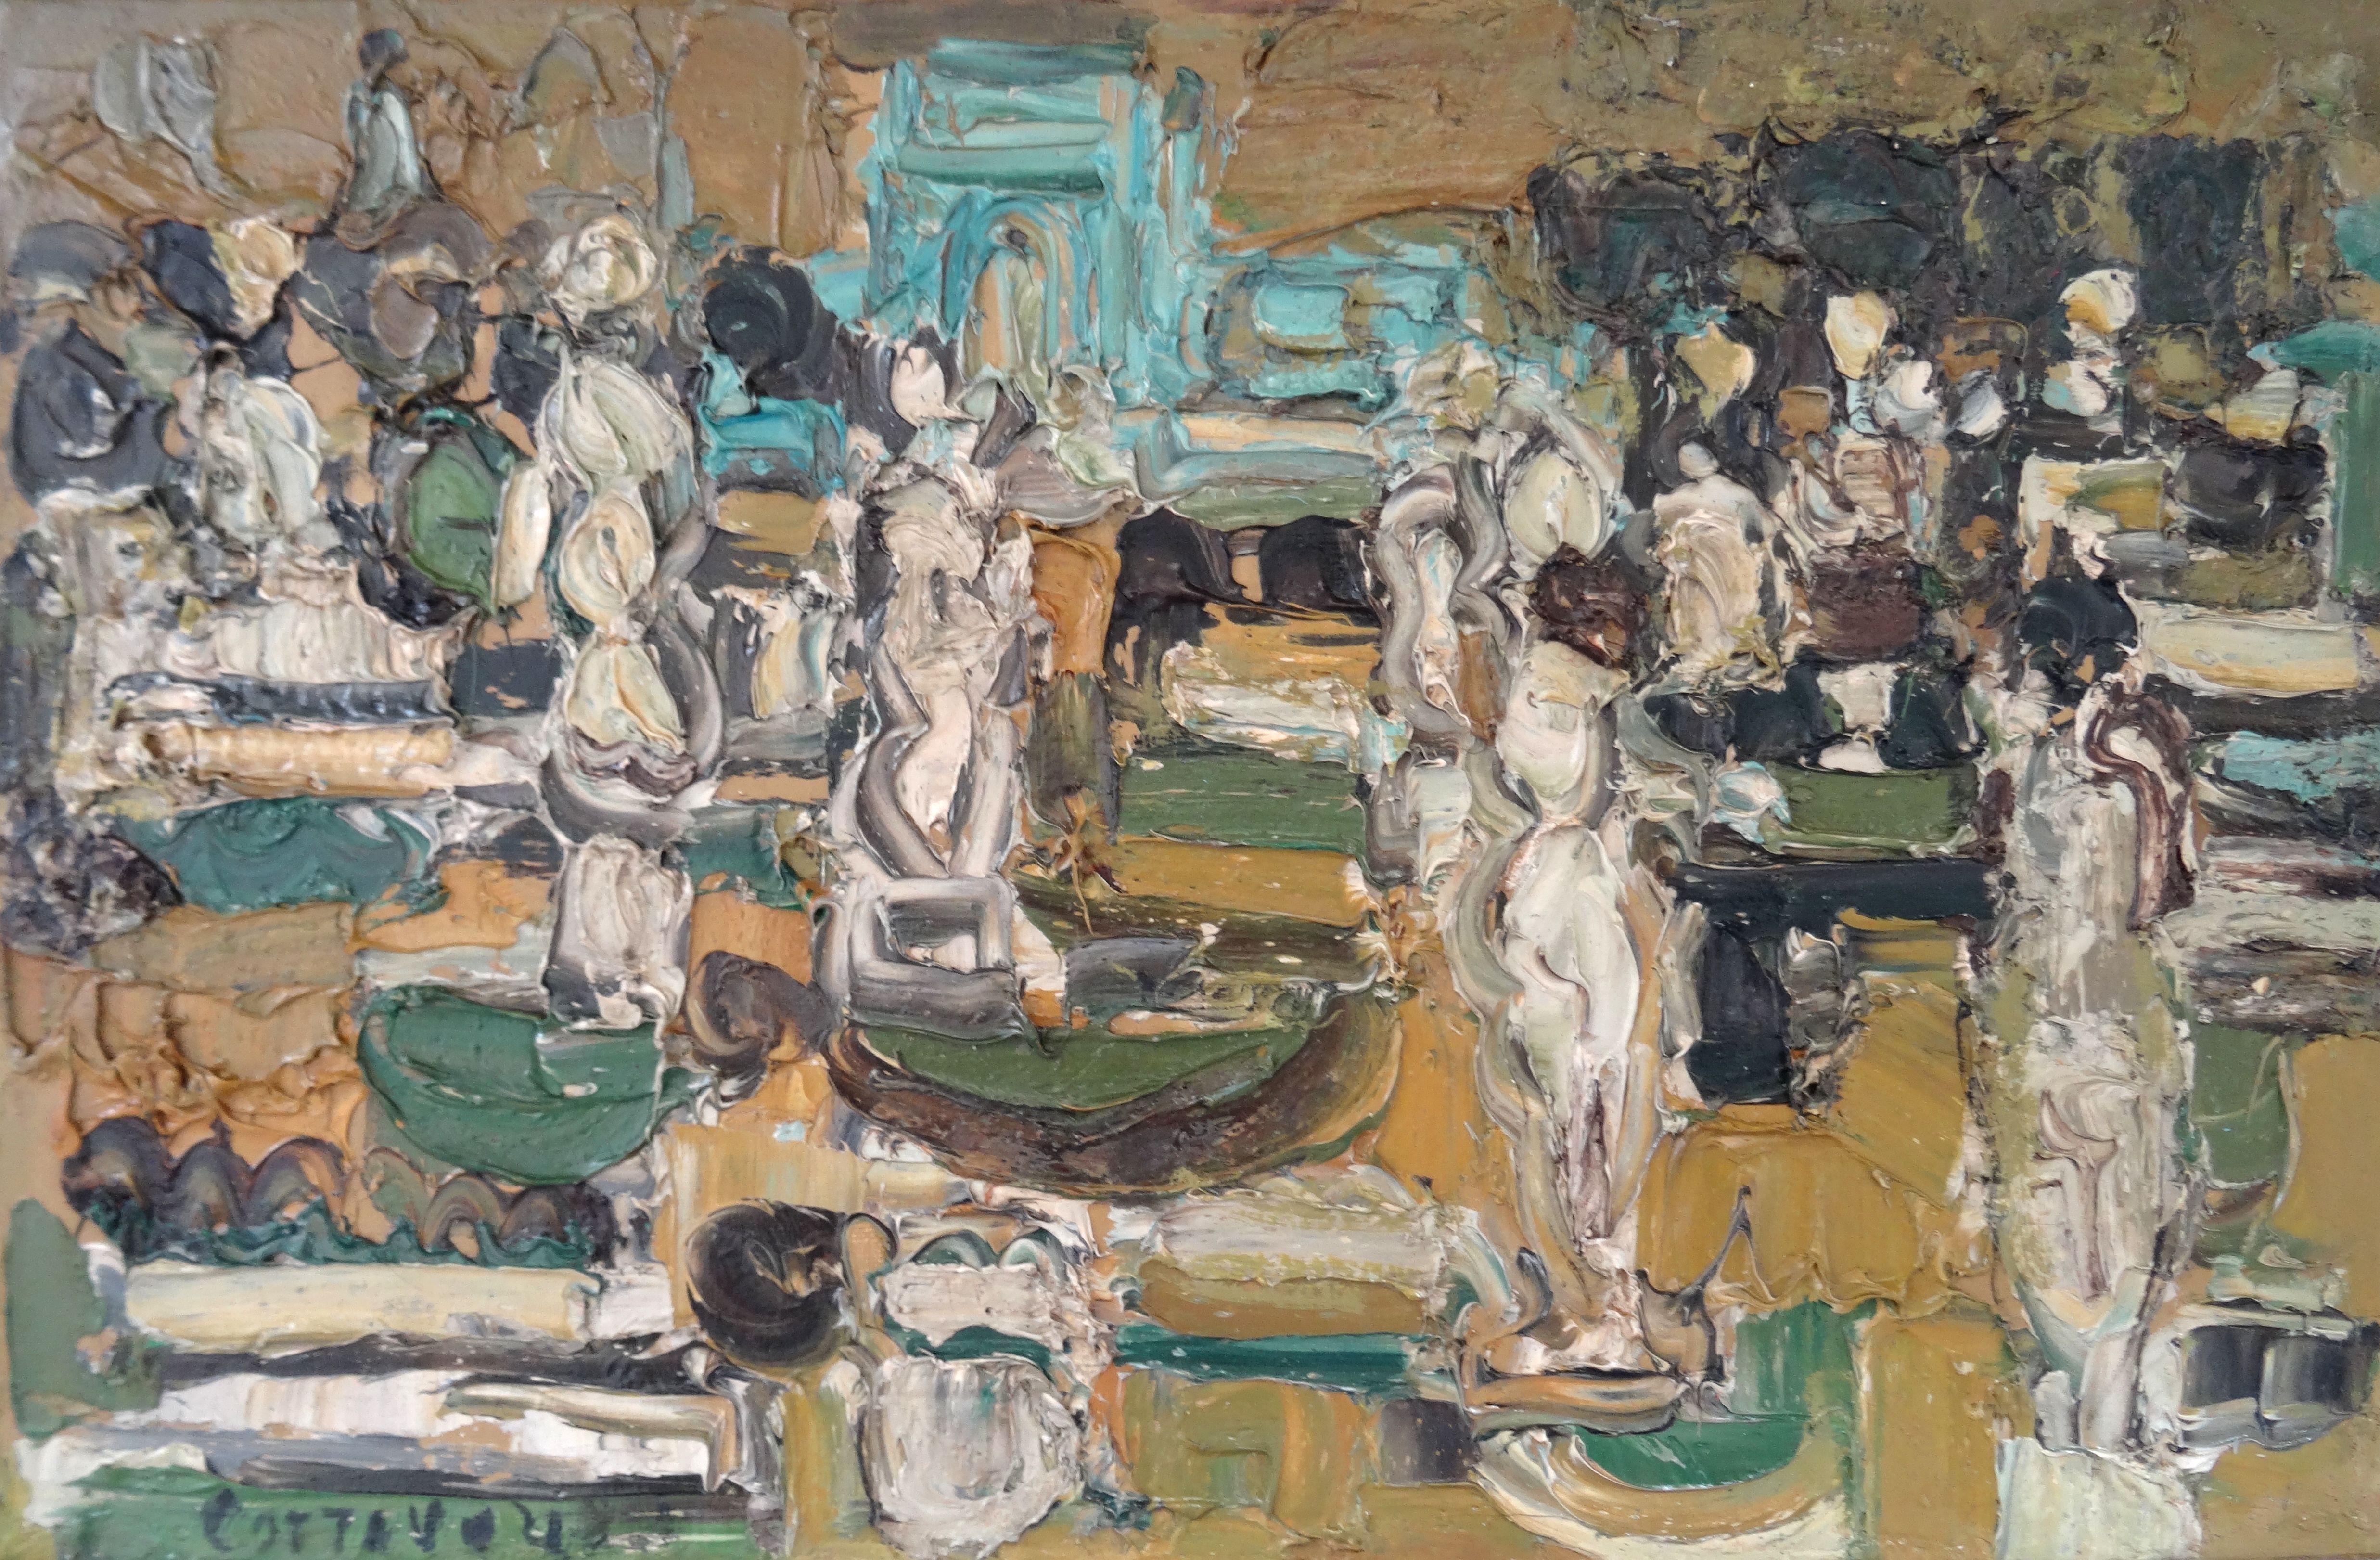 Paris, Tuileries Garden. 1961. Oil on canvas, 27x41 cm - Abstract Painting by André Cottavoz